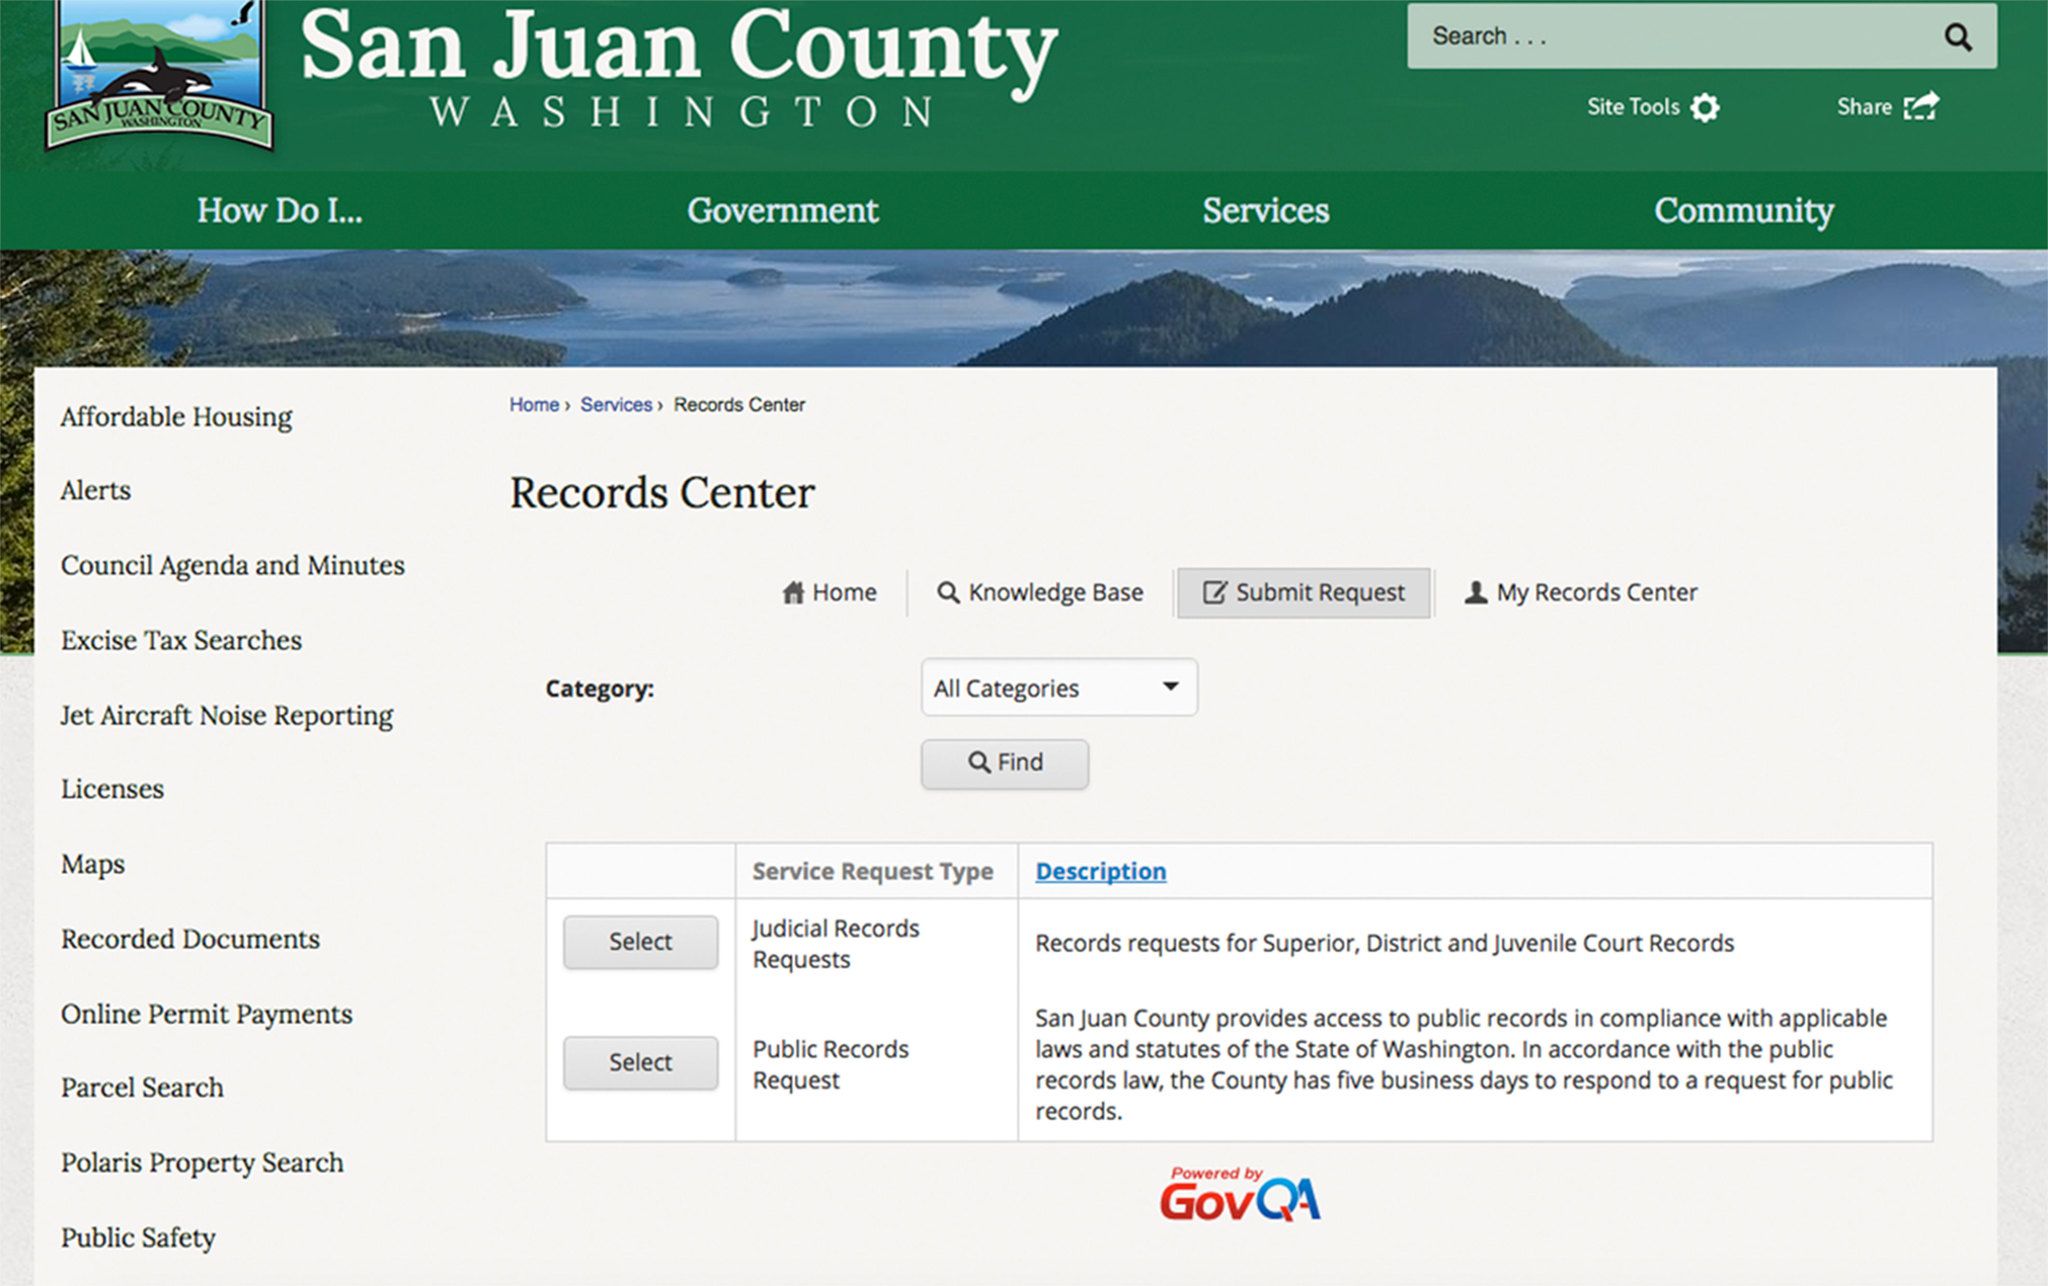 State and local governments address public record requests